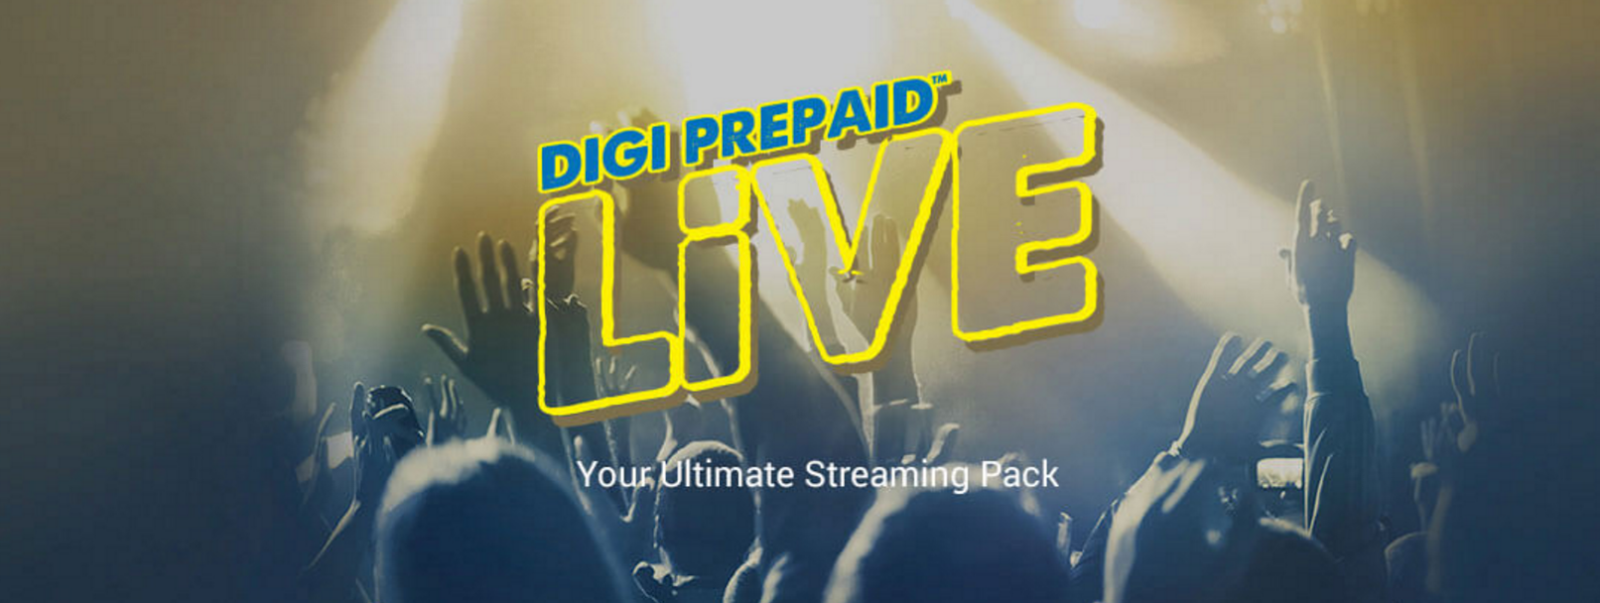 Digi's new Prepaid Live plan comes with up to 8GB of free internet